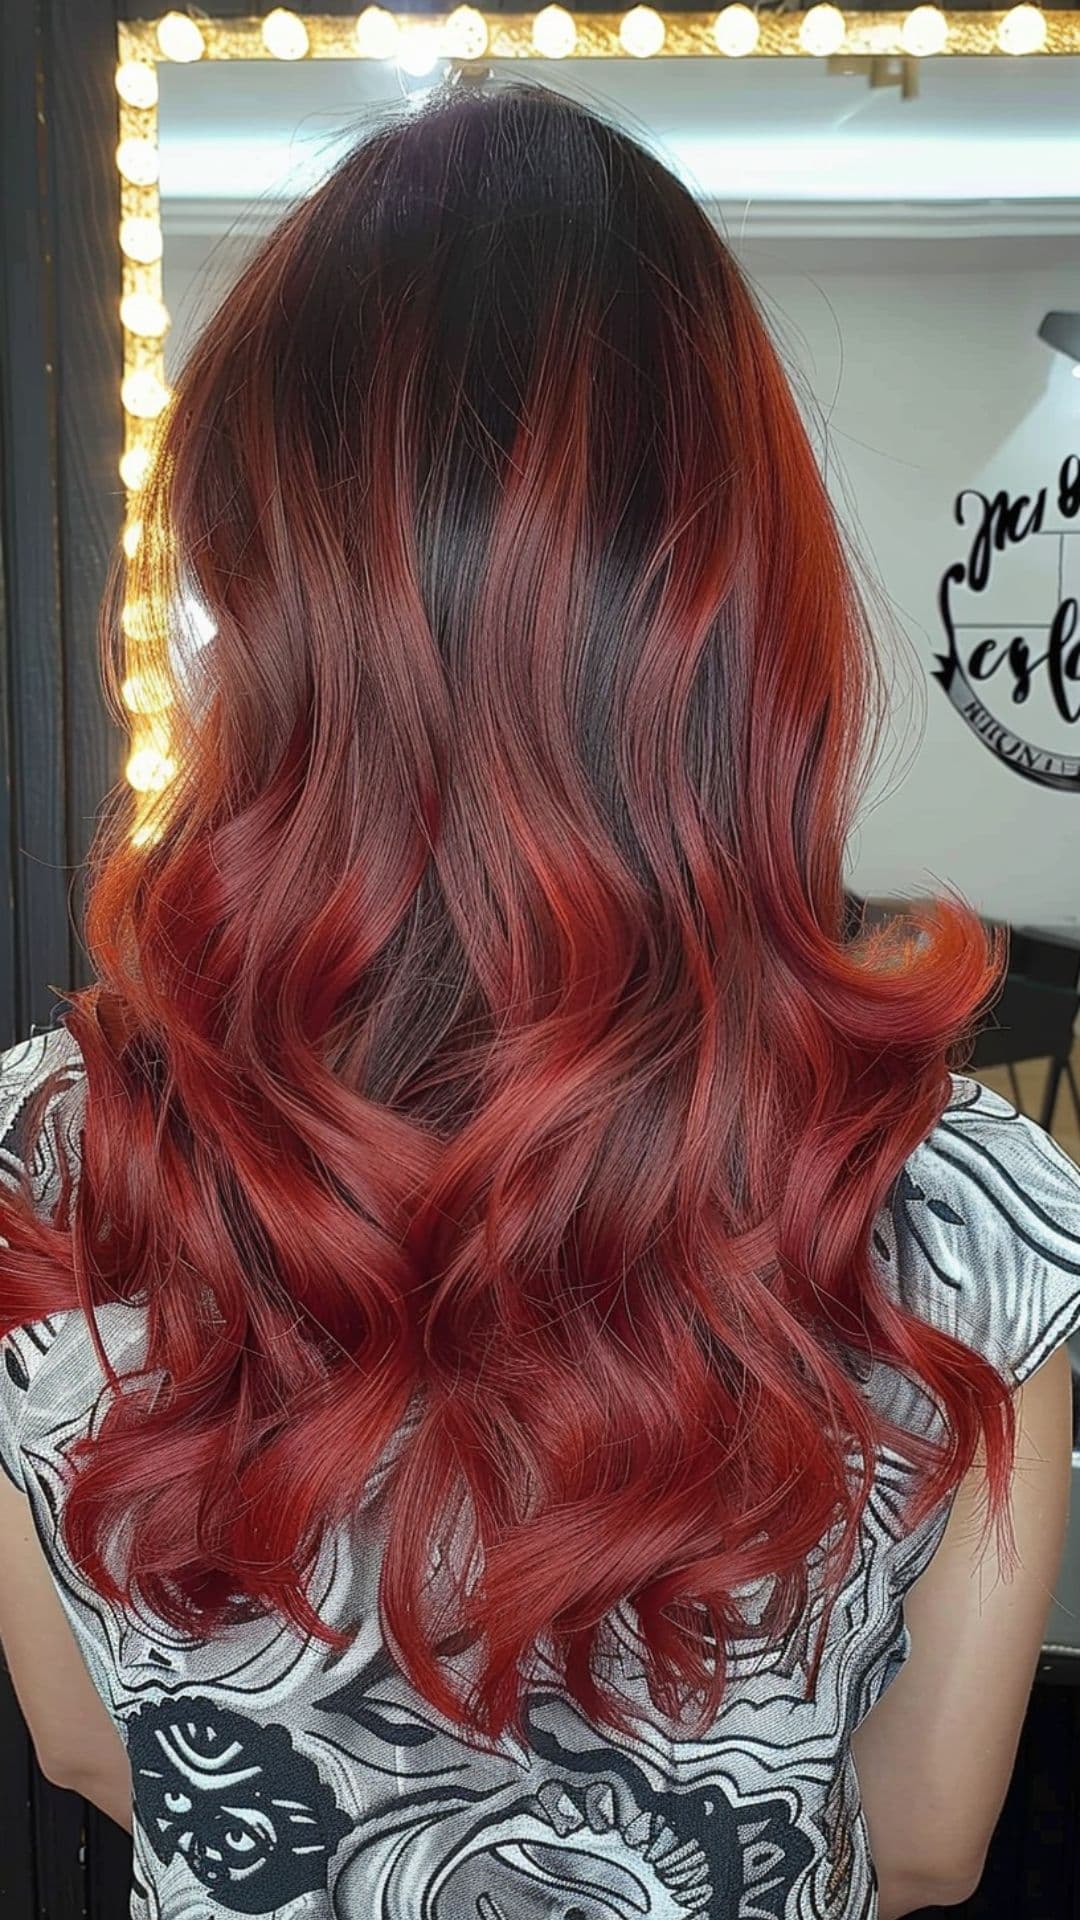 A woman modelling a red ombre hair.